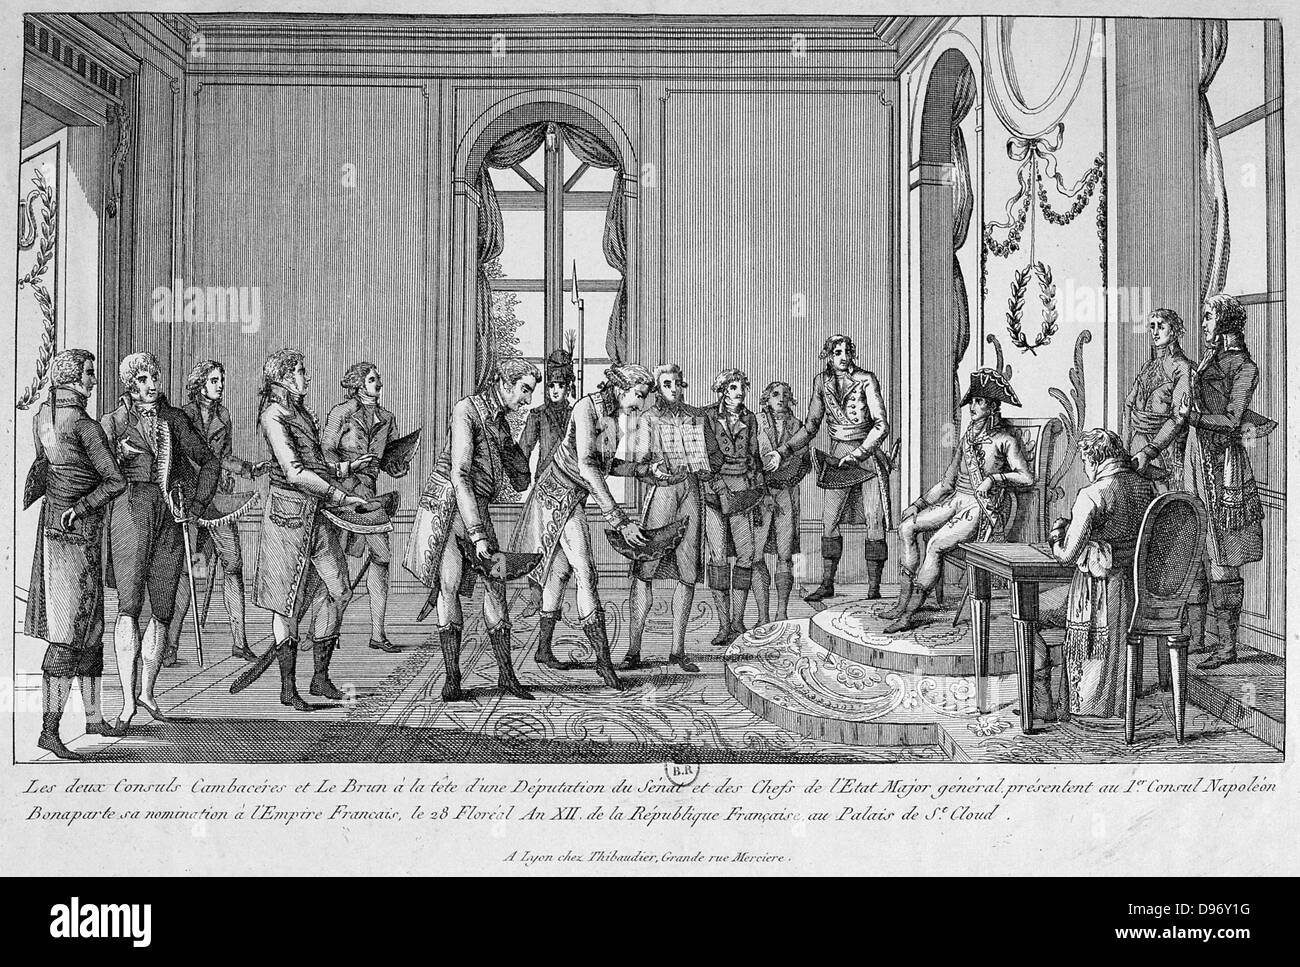 Consuls Cambaceres and Le Brun presenting the First Consul Napoleon his nomination as Emperor of France. Engraving. Stock Photo